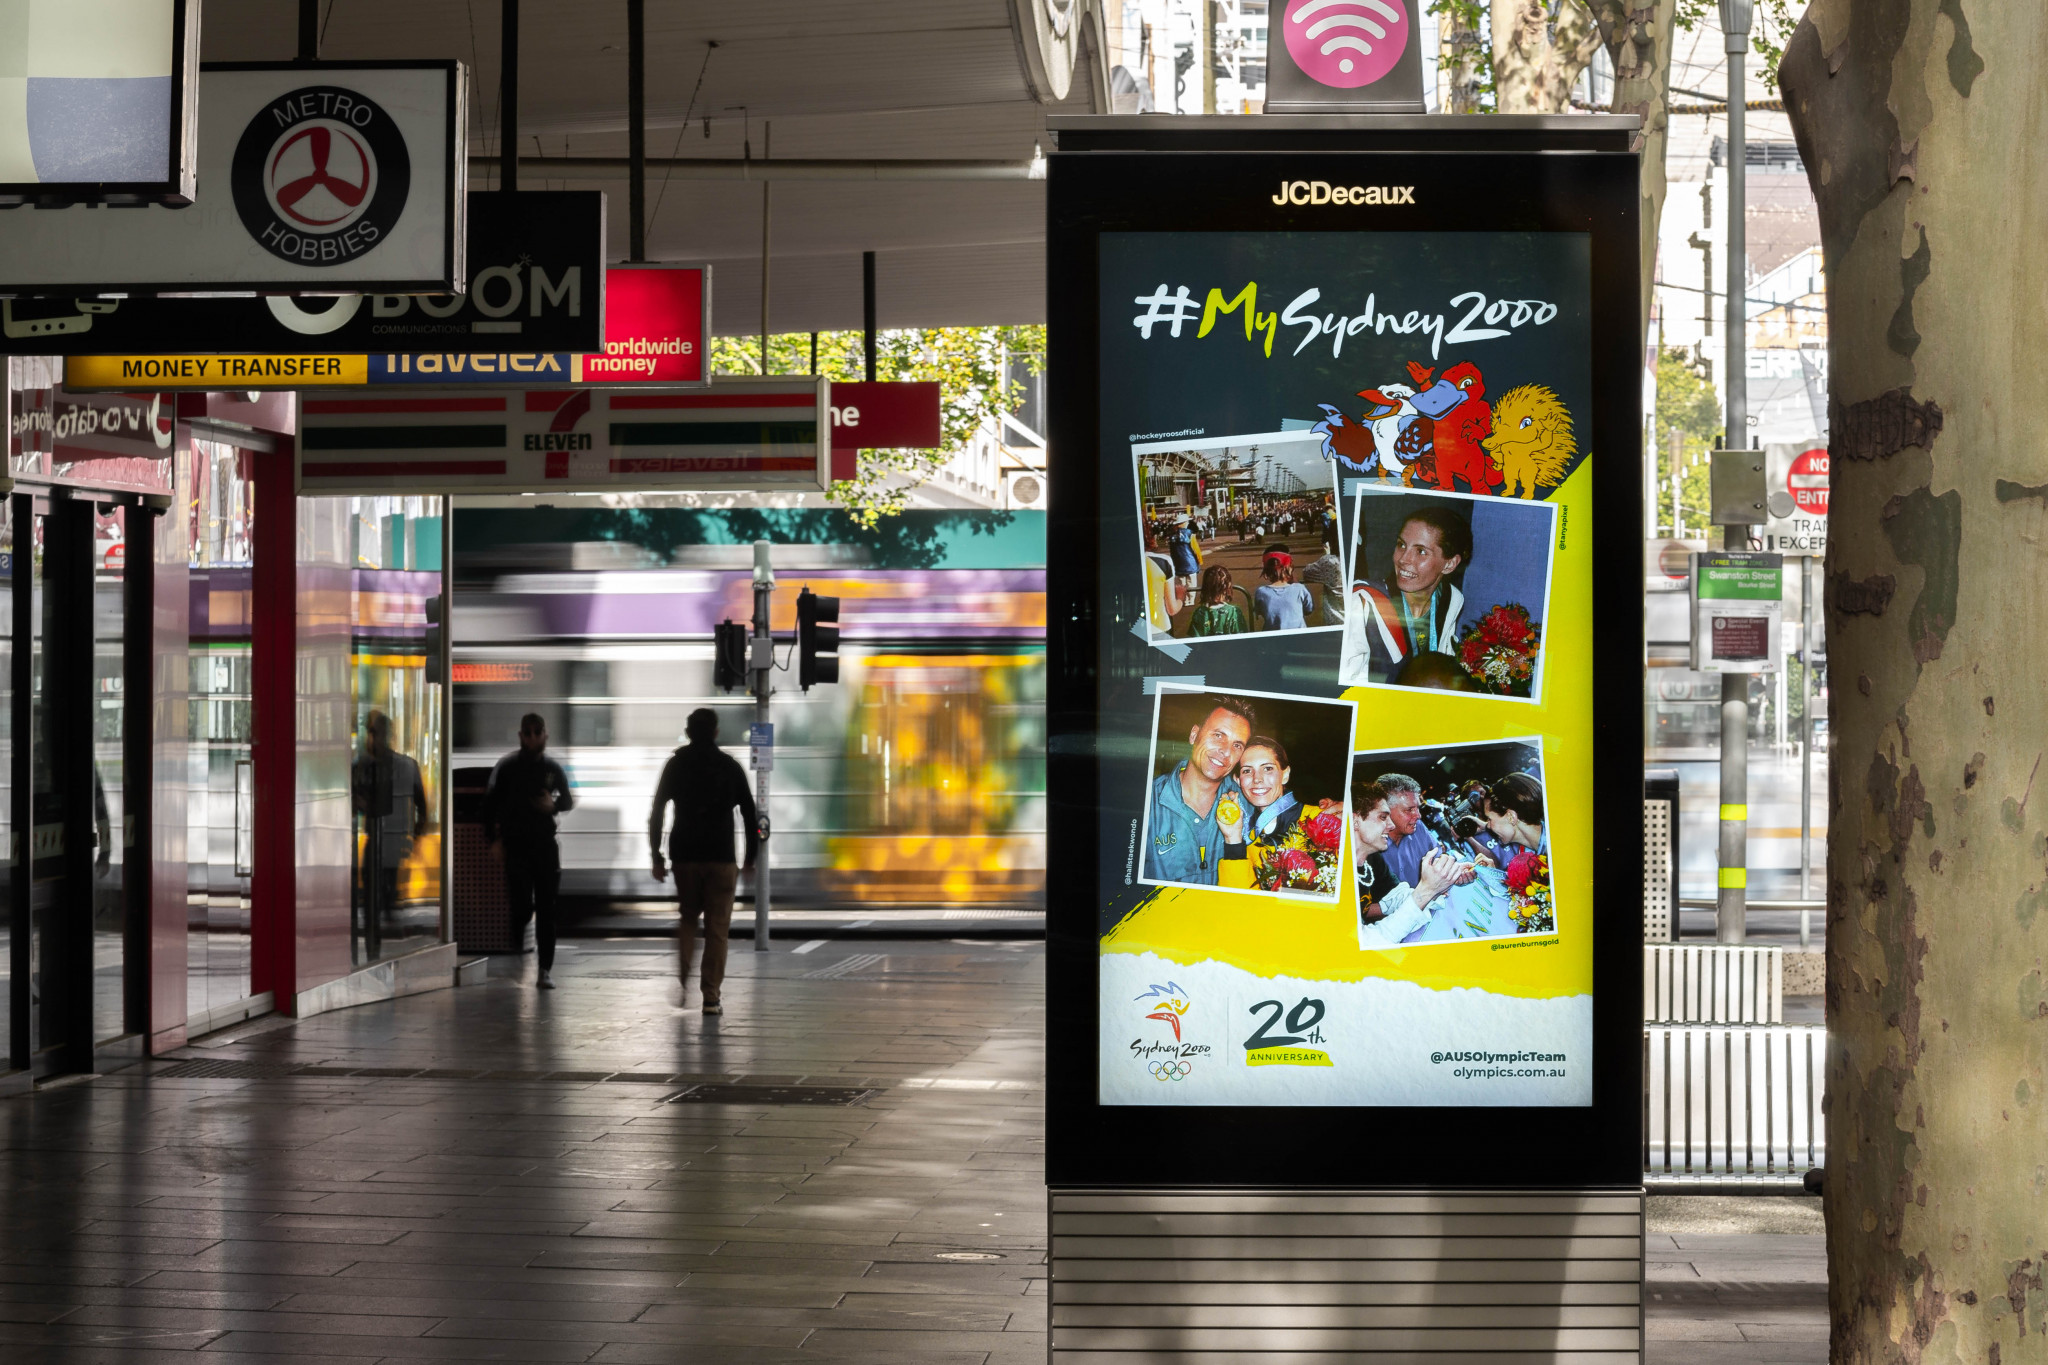 The AOC and JCDecaux partnered on a social campaign to mark the 20th anniversary of Sydney 2000 ©AOC